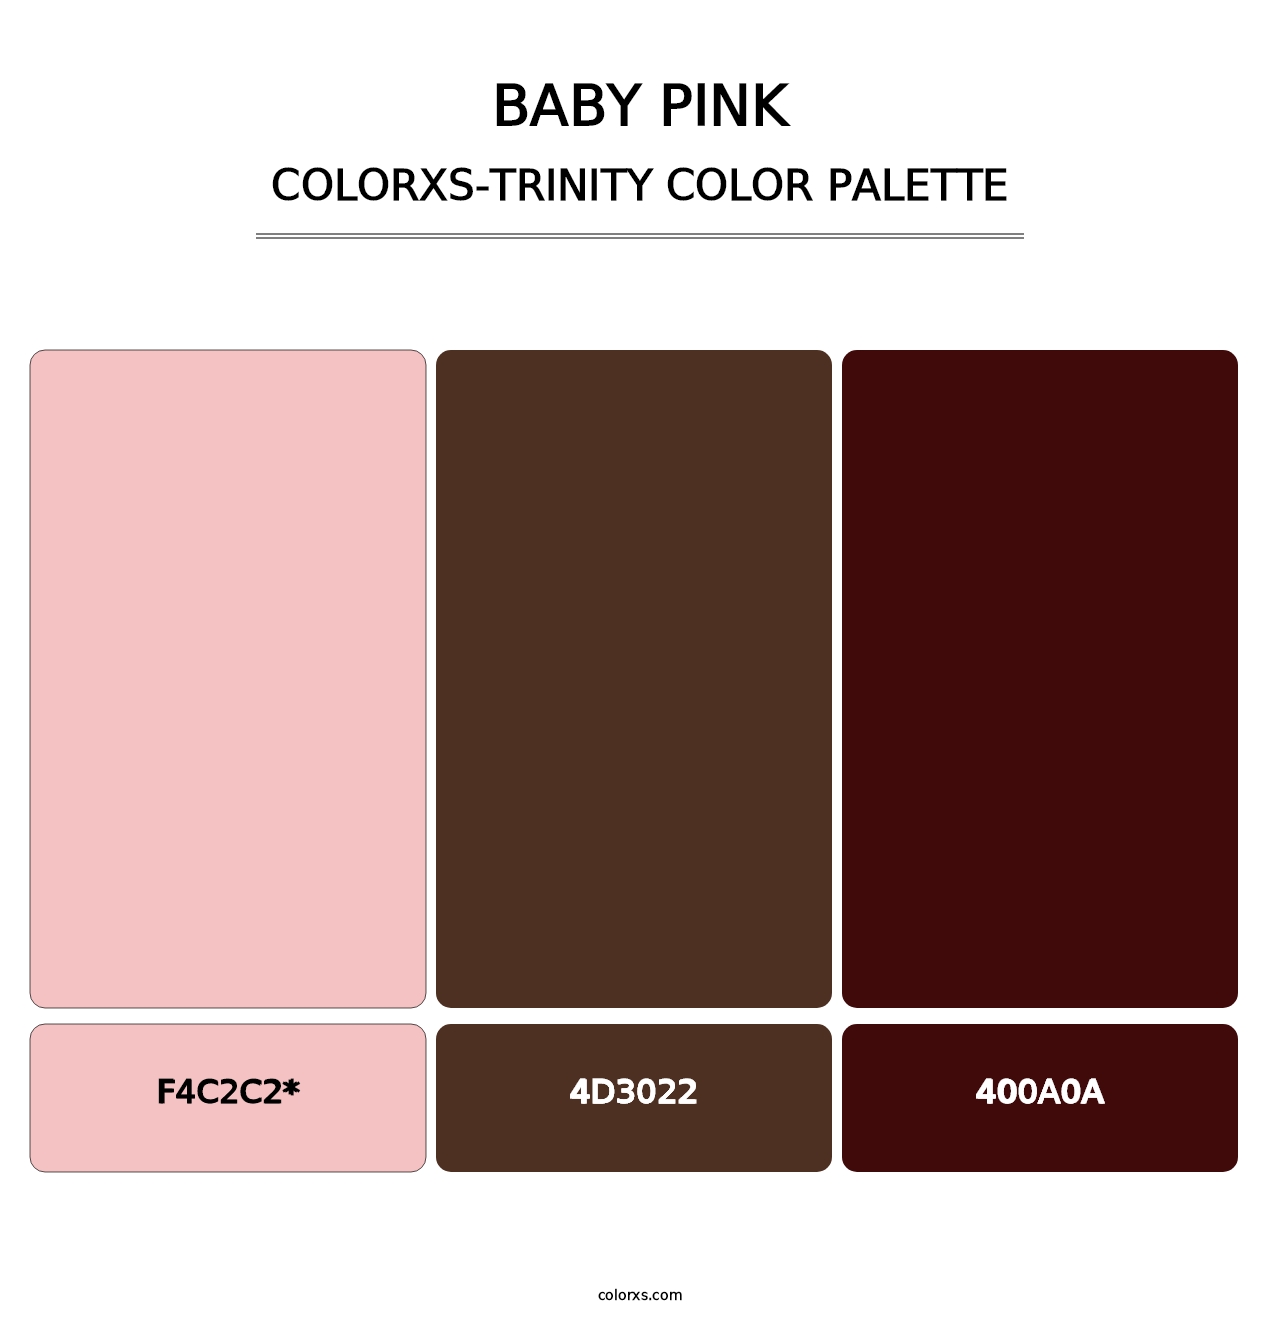 Baby Pink - Colorxs Trinity Palette